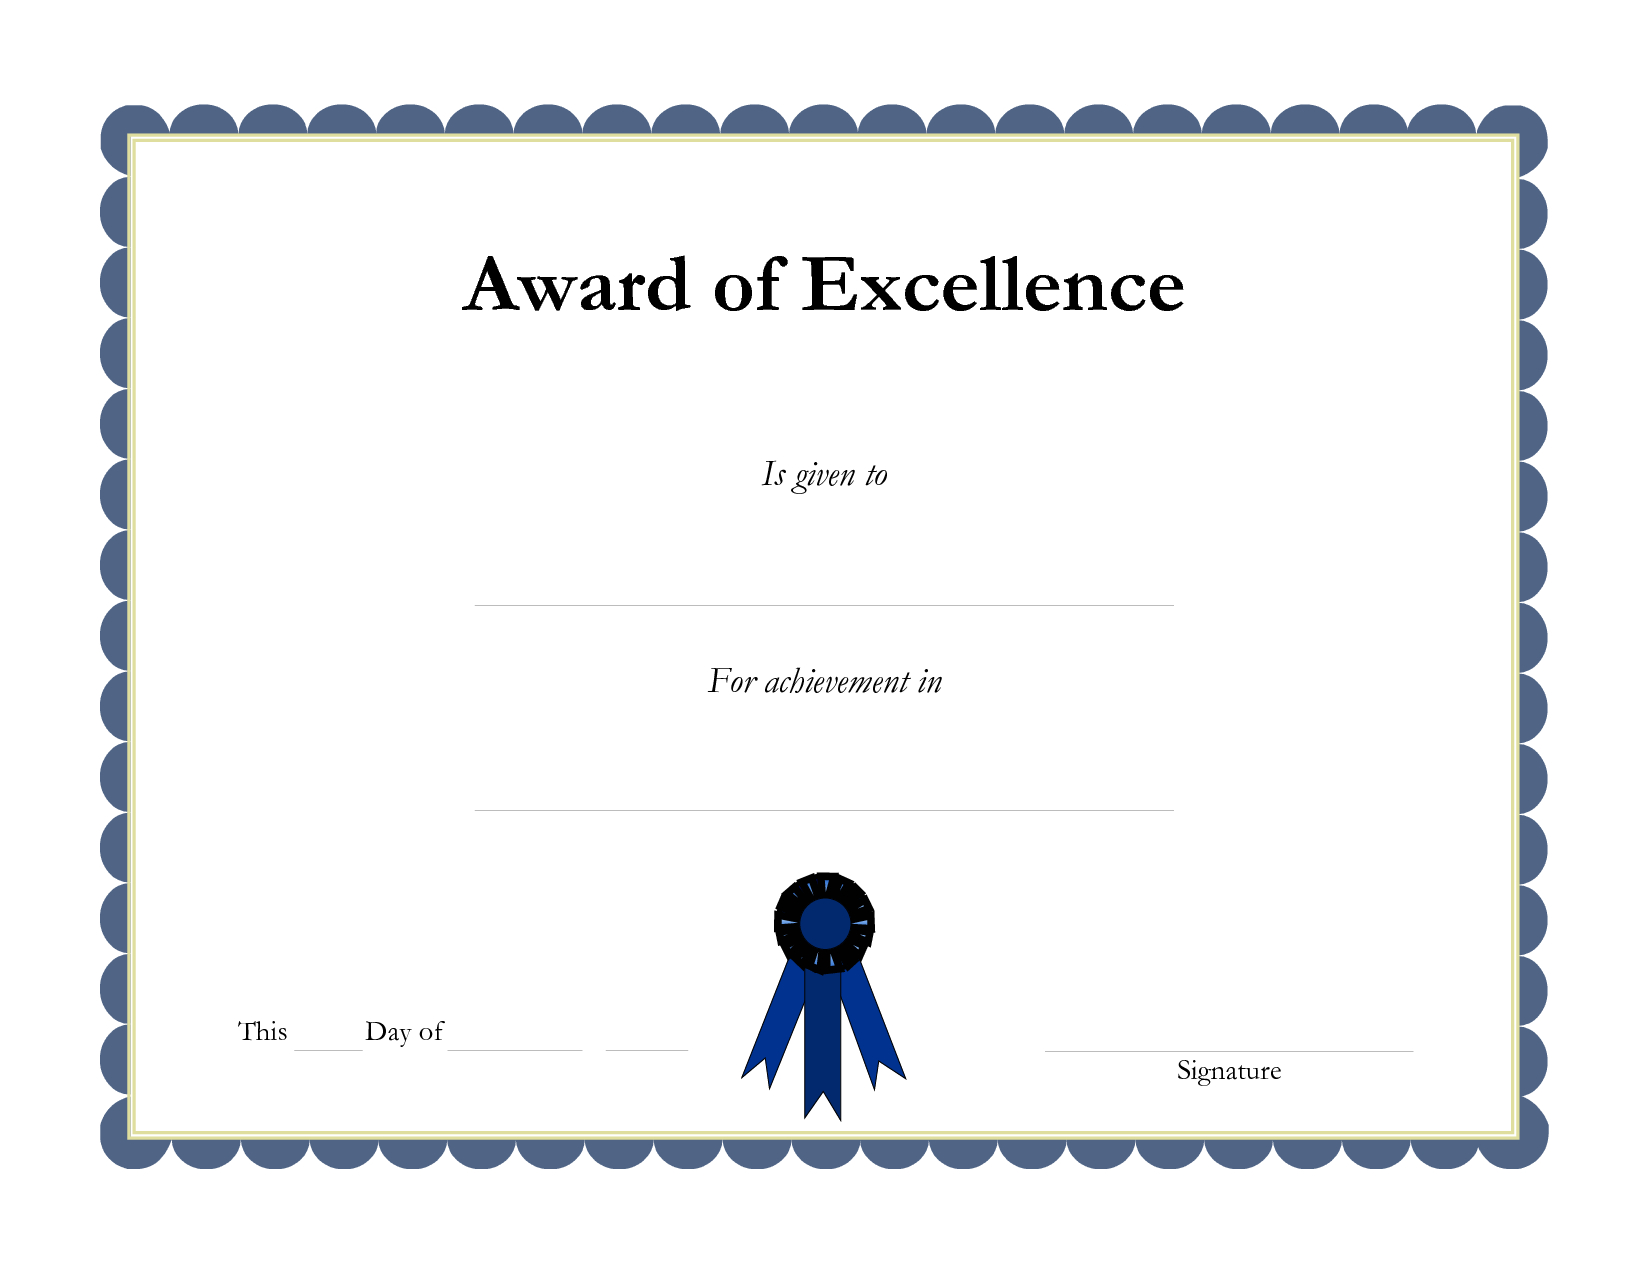 Award Template Certificate Borders  Award Of Excellenceis Given pertaining to Award Certificate Border Template